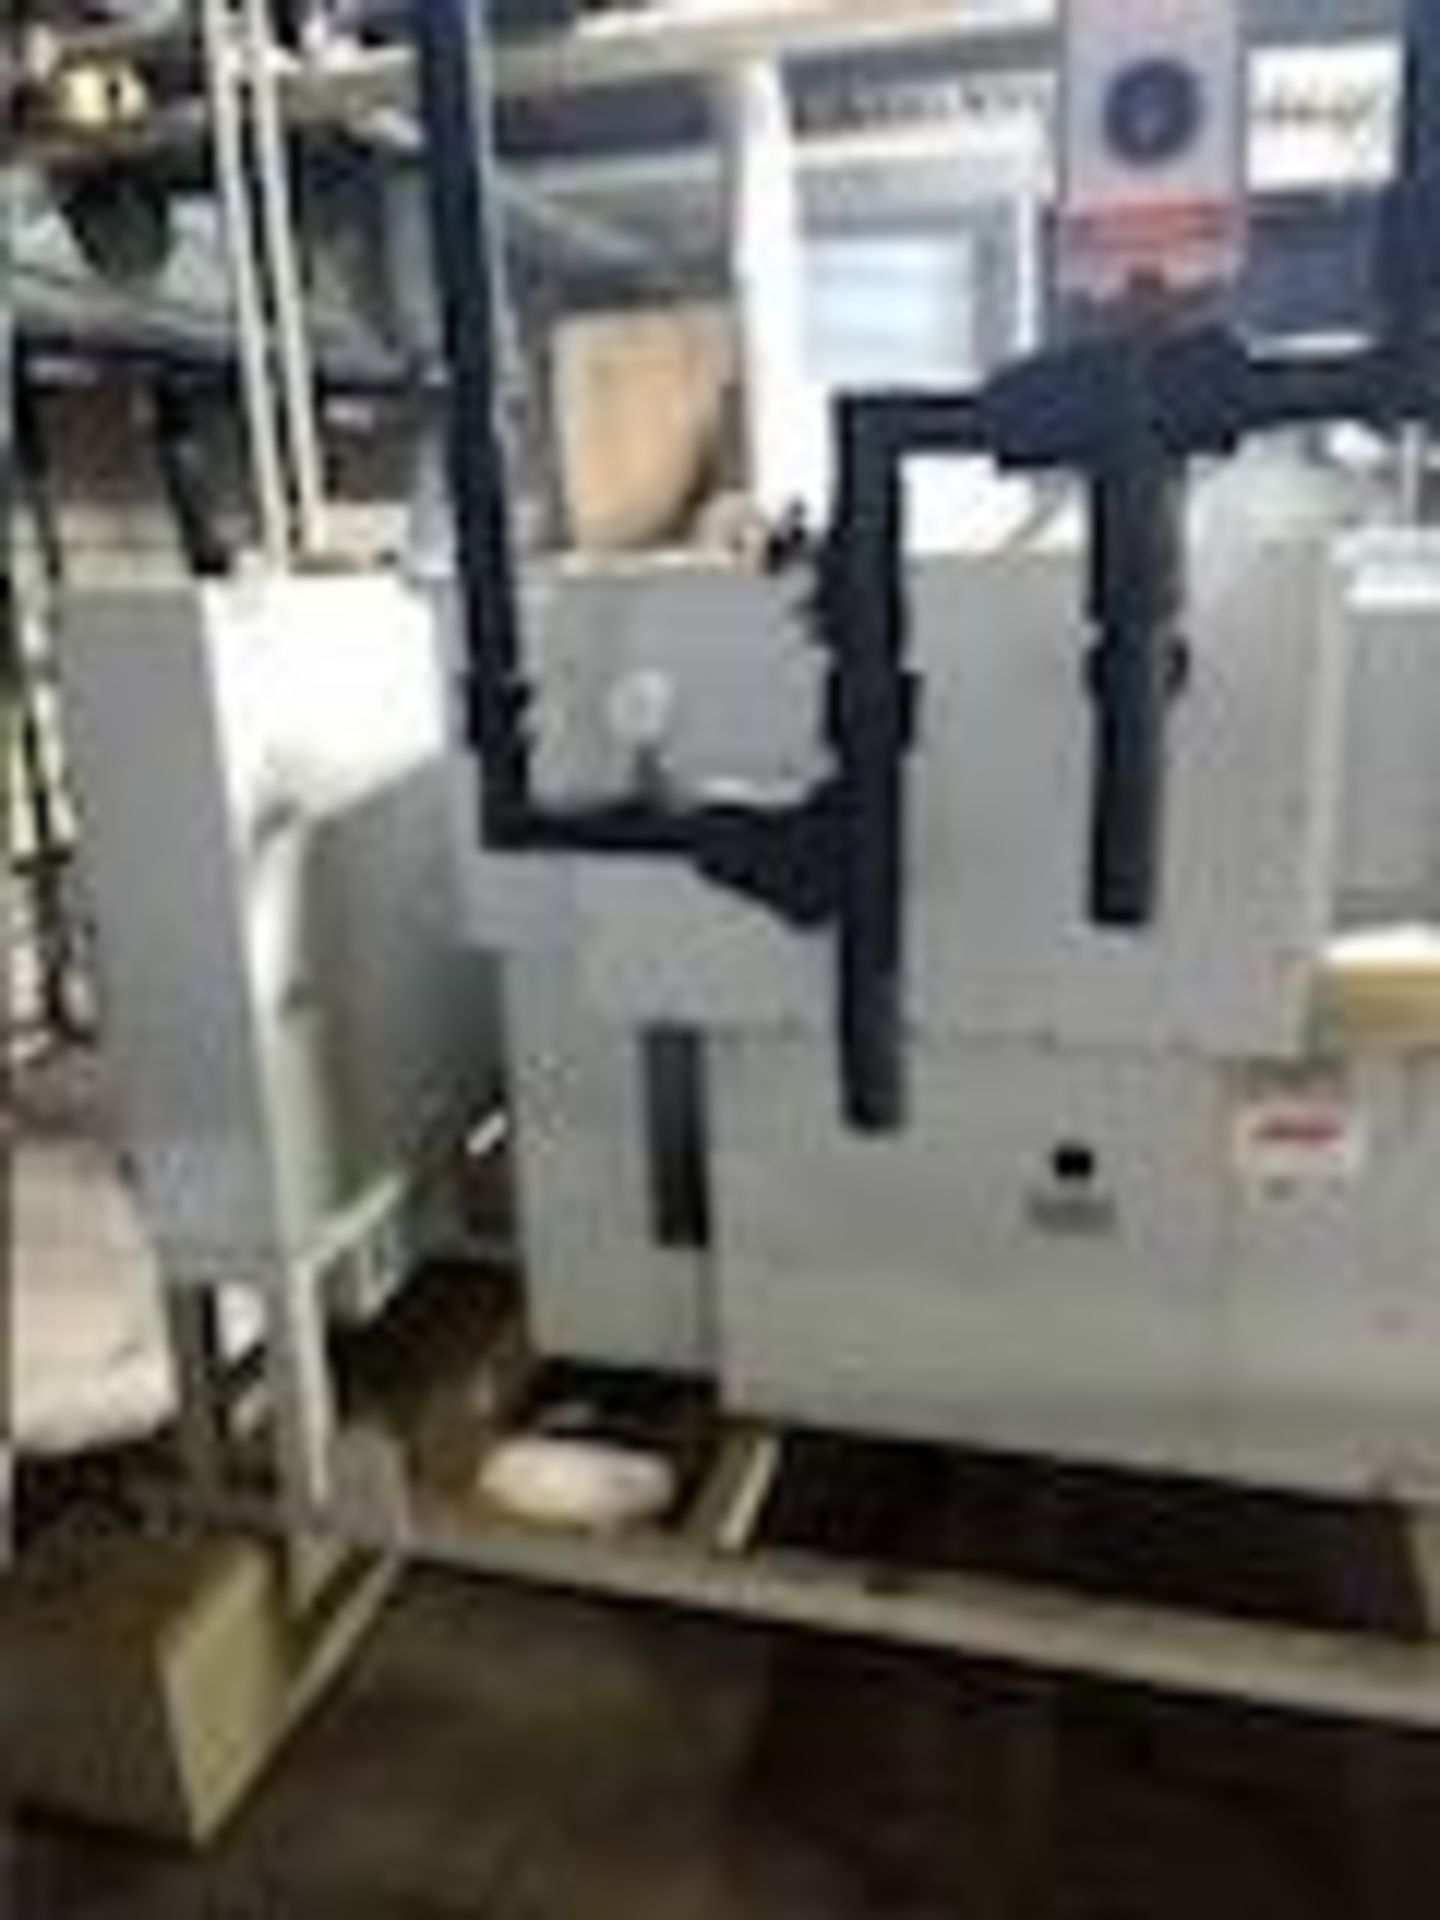 BRY-AIR INDUSTRIAL DEHUMIDIFIER MODEL NO. A-3-BE-213-CHW-P - Image 2 of 11